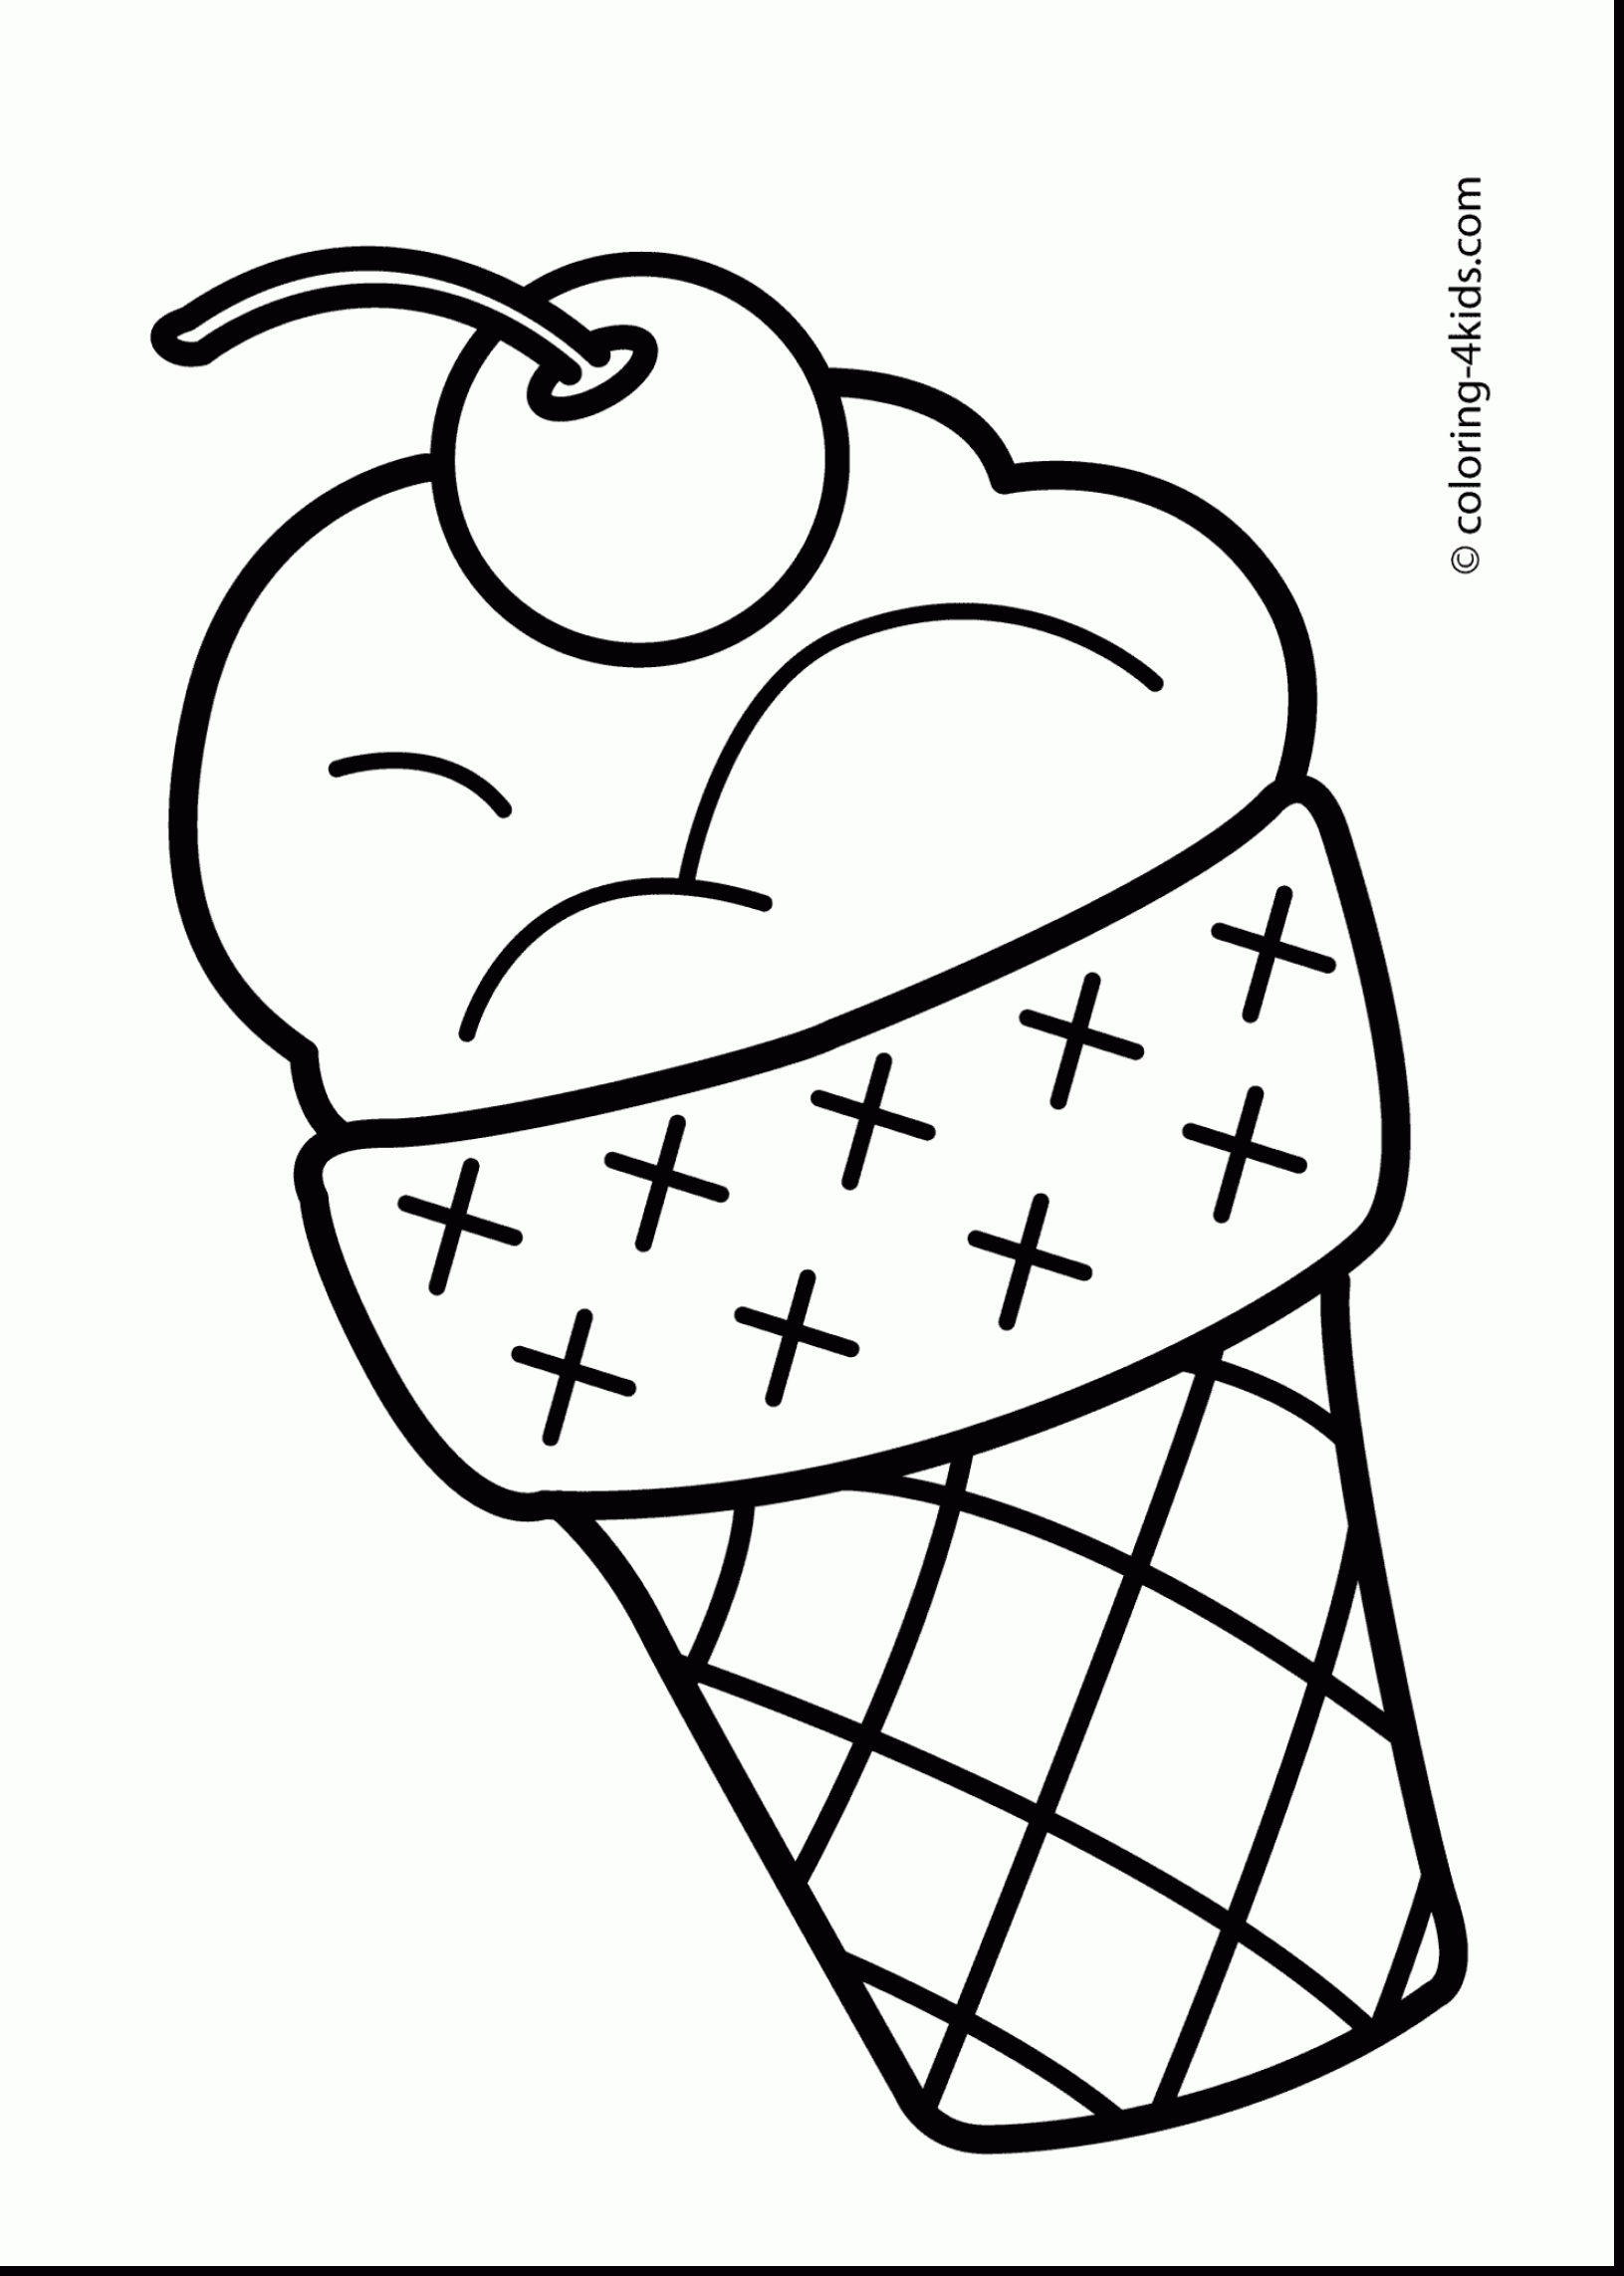 Coloring Pages : Coloring Pages Color Sheets Ruaya My Dream Co Free - Free Printable Coloring Pages For Kids